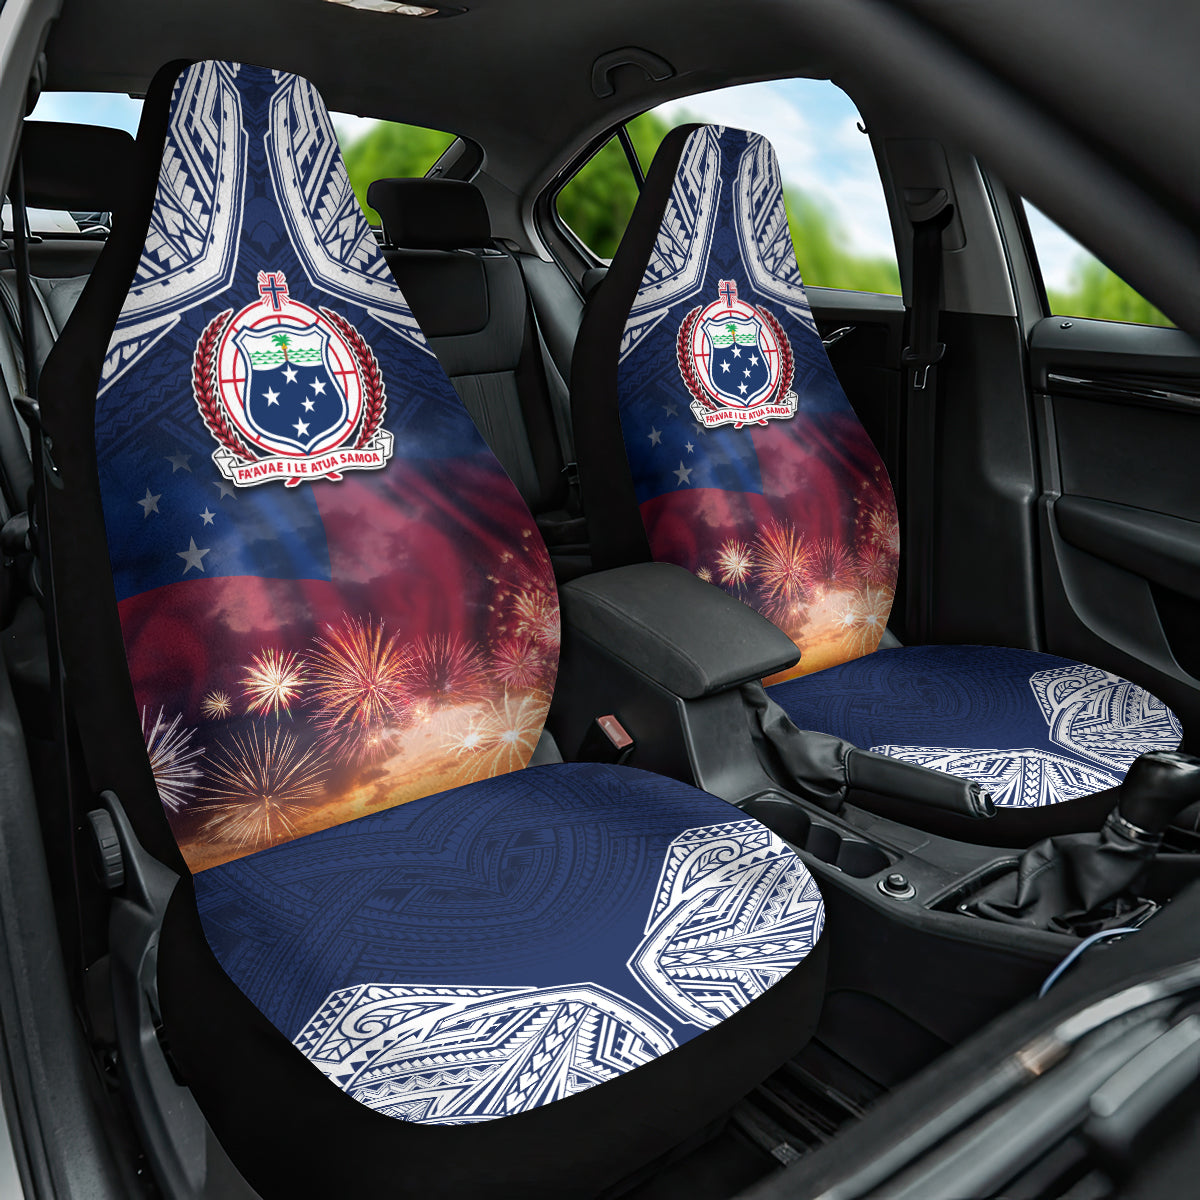 Samoa Indenpendence Day Car Seat Cover Sky Fireworks with Flag Style LT03 One Size Black - Polynesian Pride